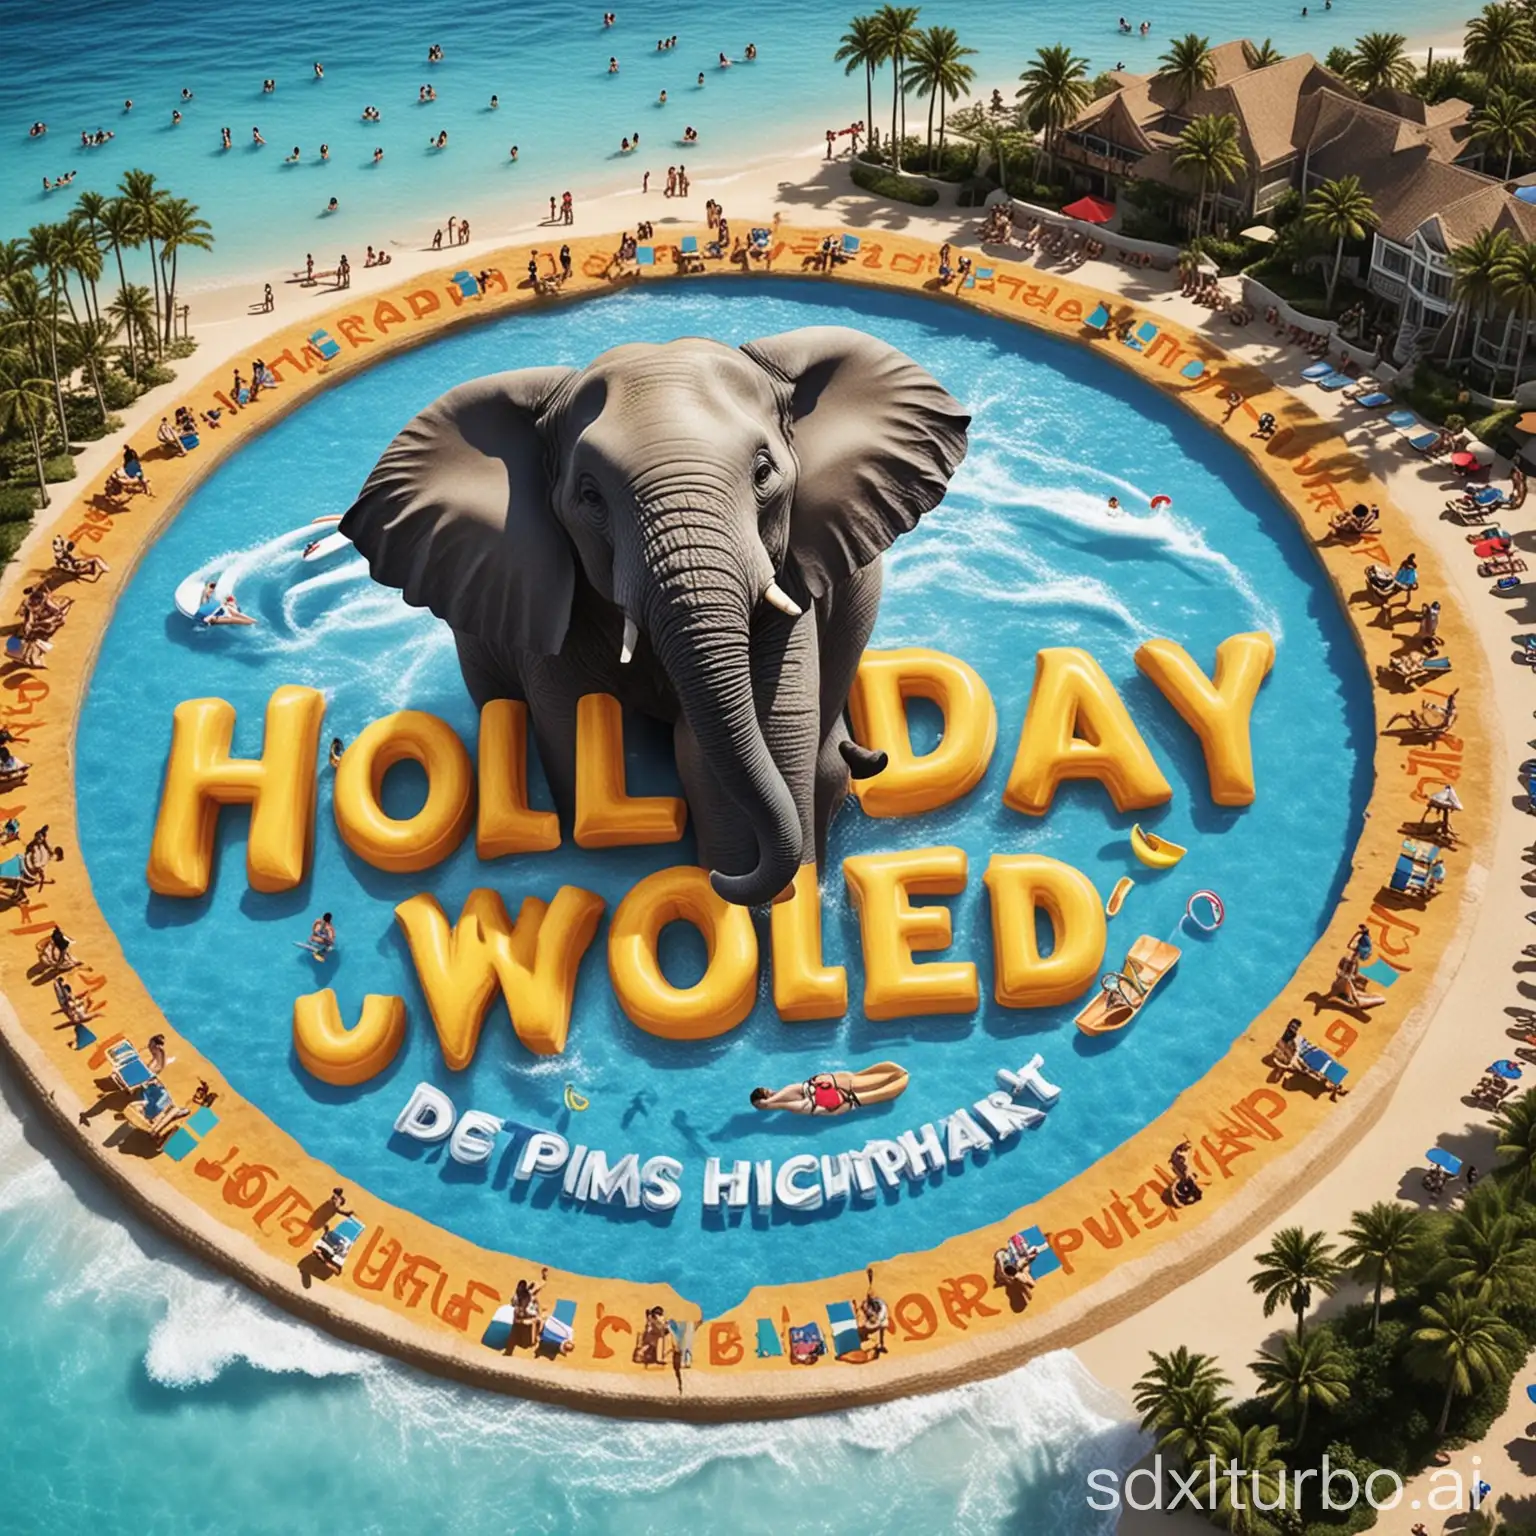 Make a logo for the company Holiday World, which is a complex of hotels and a water park that has an elephant as part of the logo